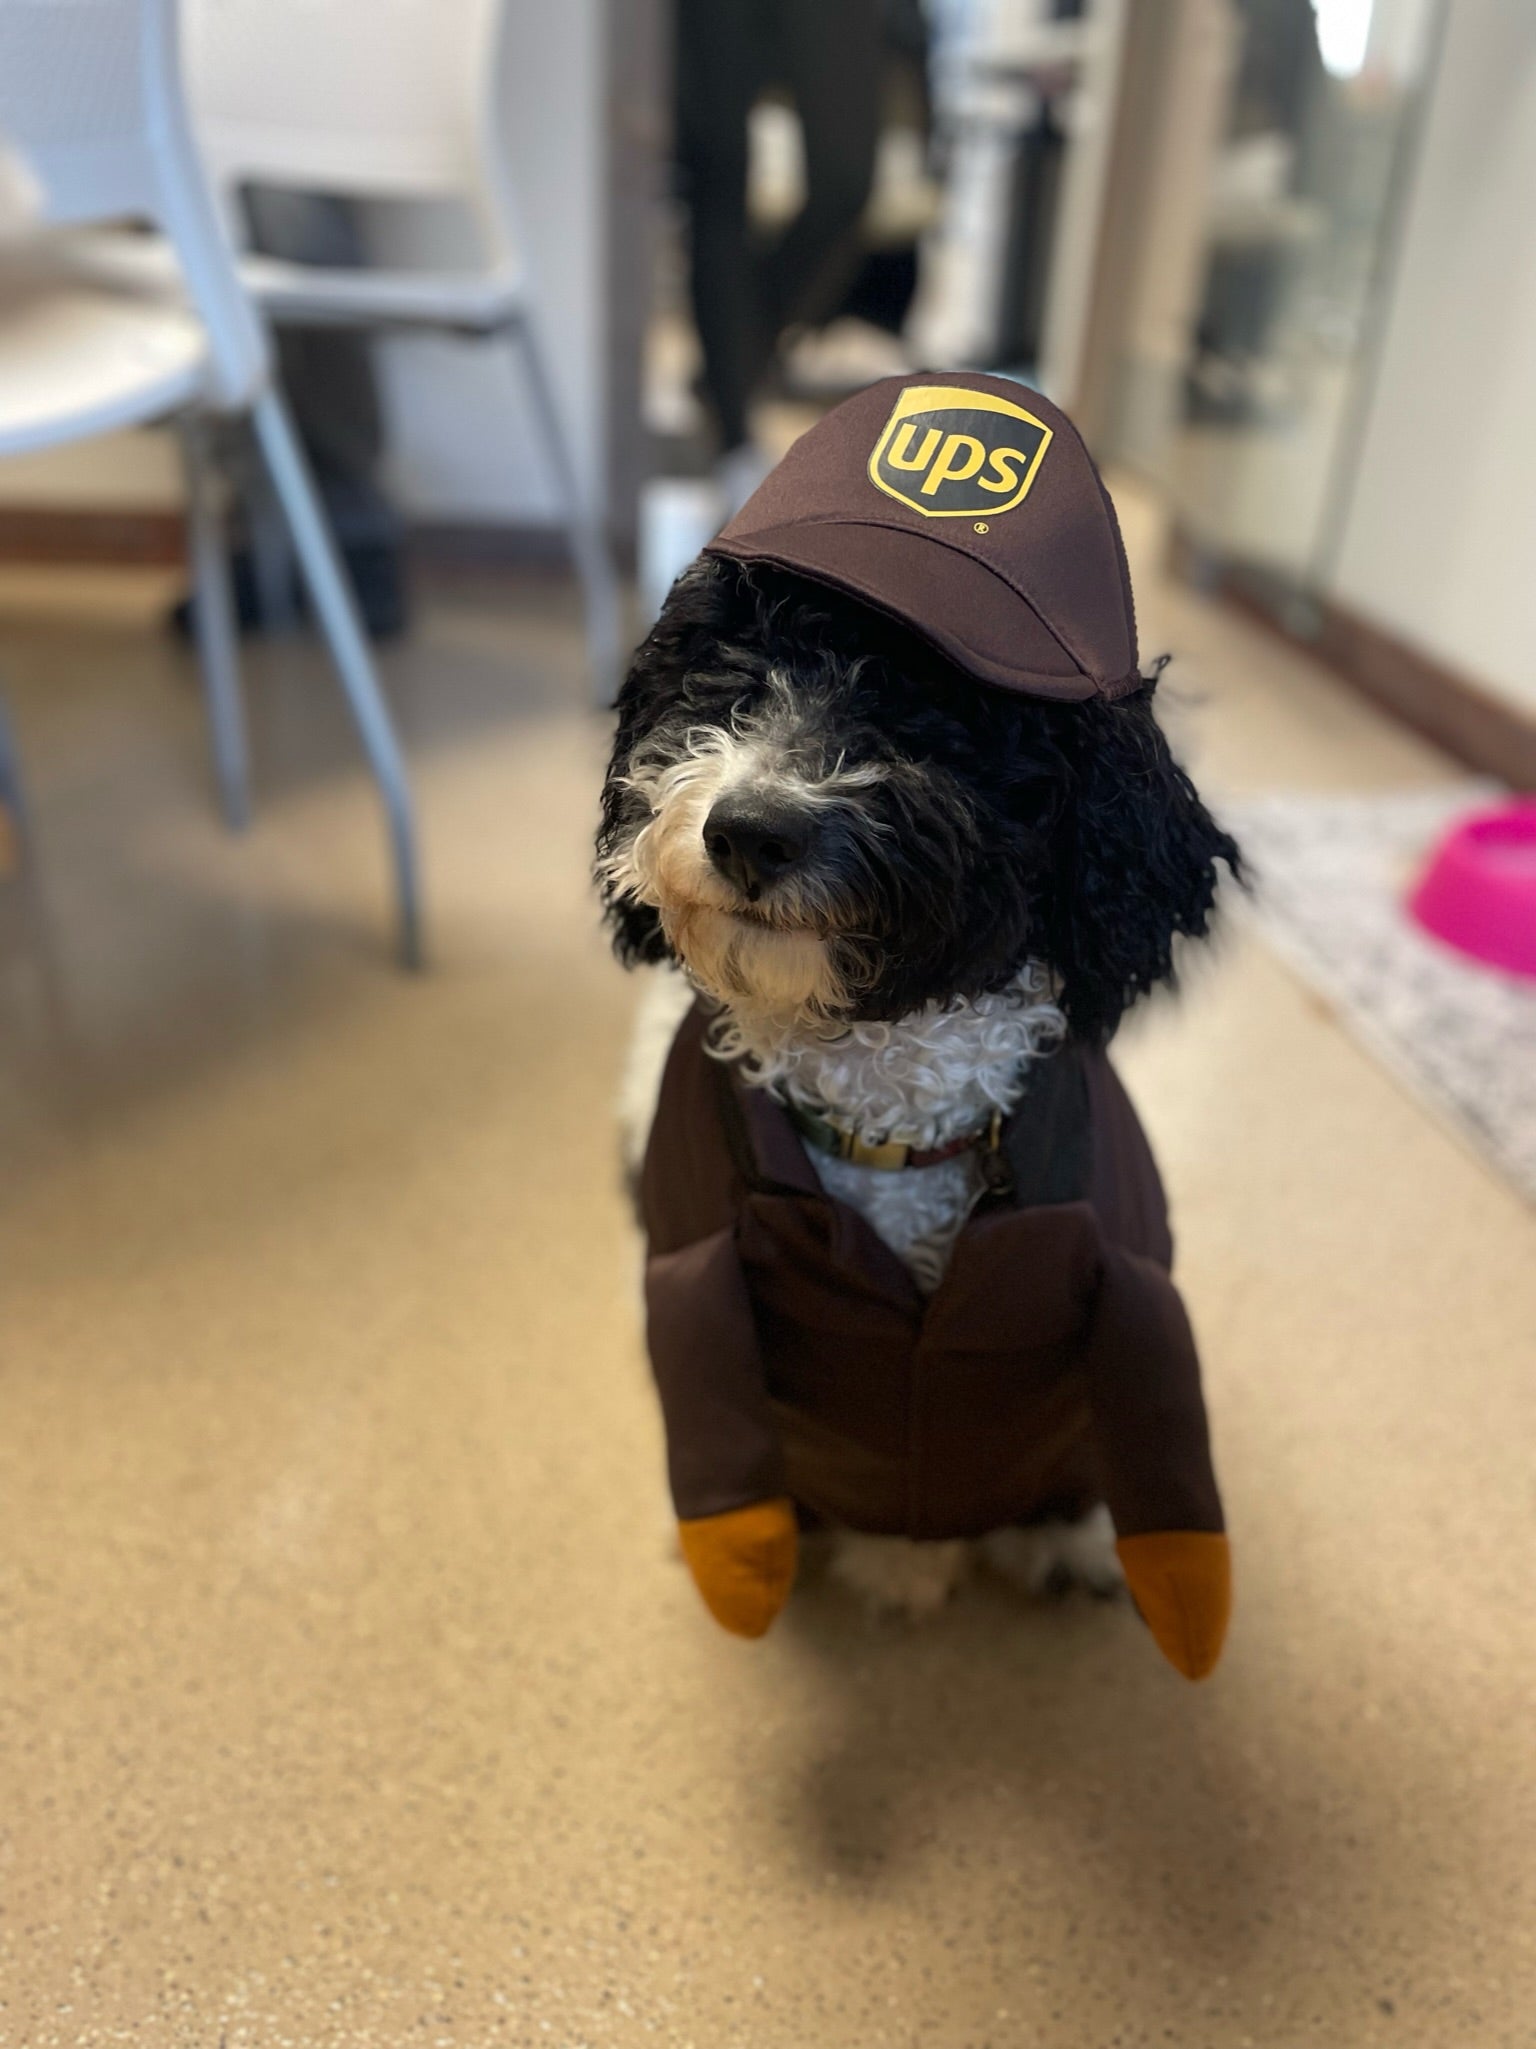 Small dog wearing a costume to look like a UPS worker